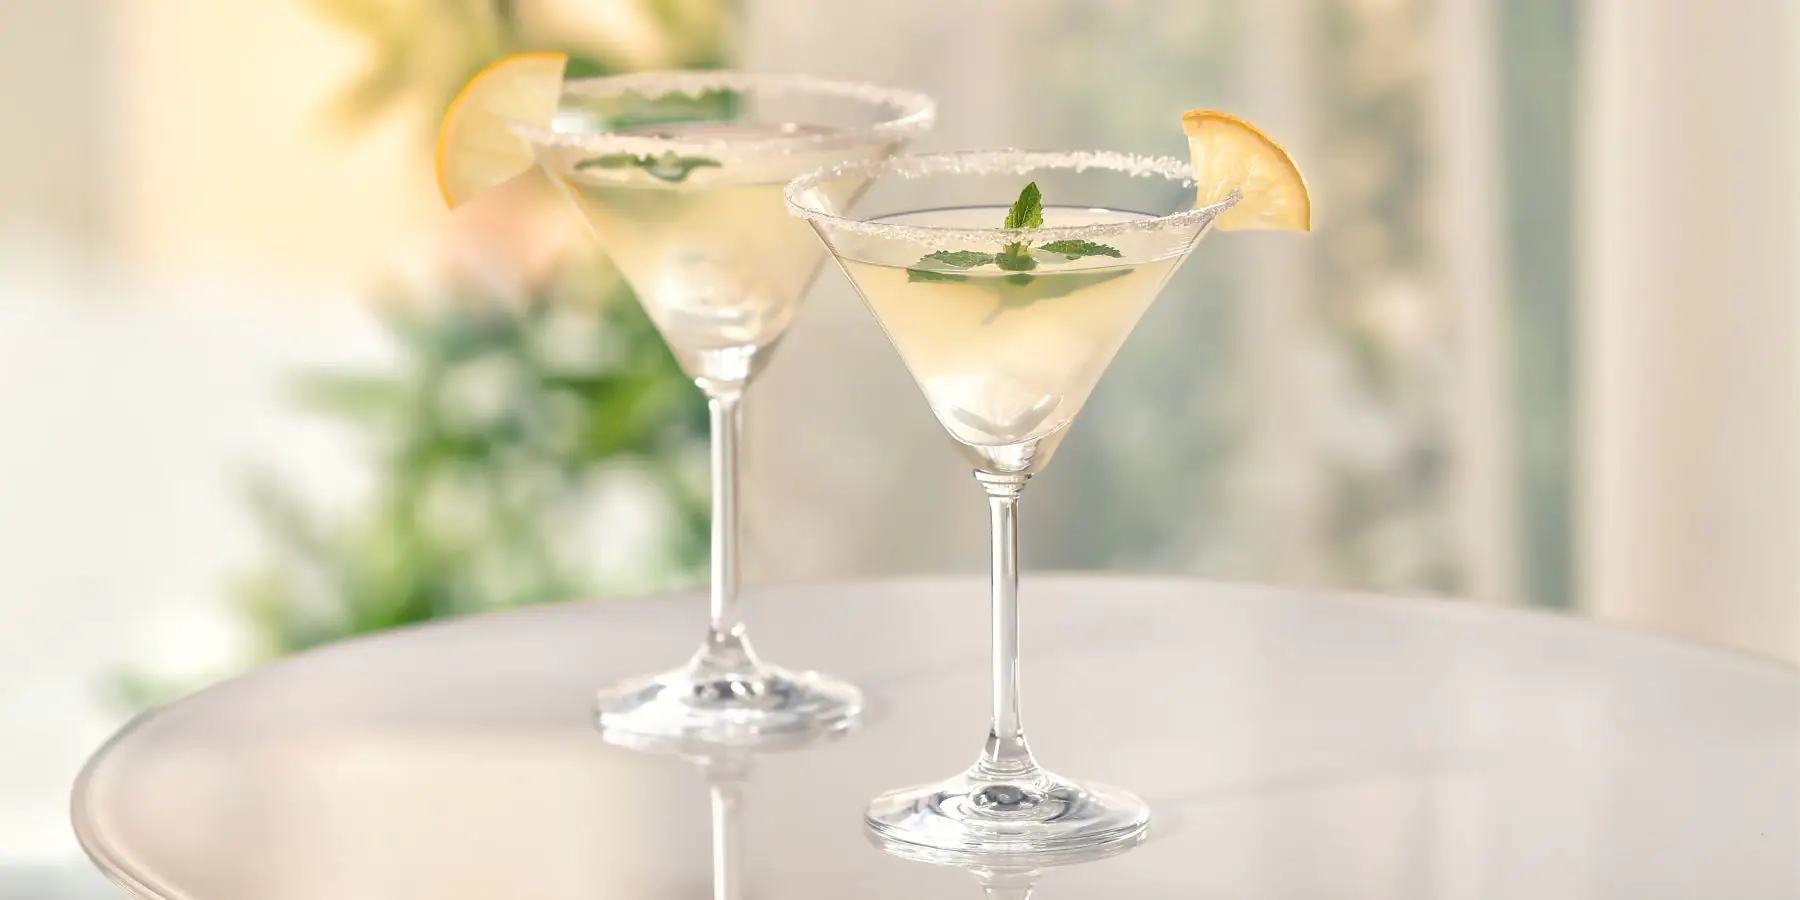 The Lemon Drop Martini You 100% Need in Your Life